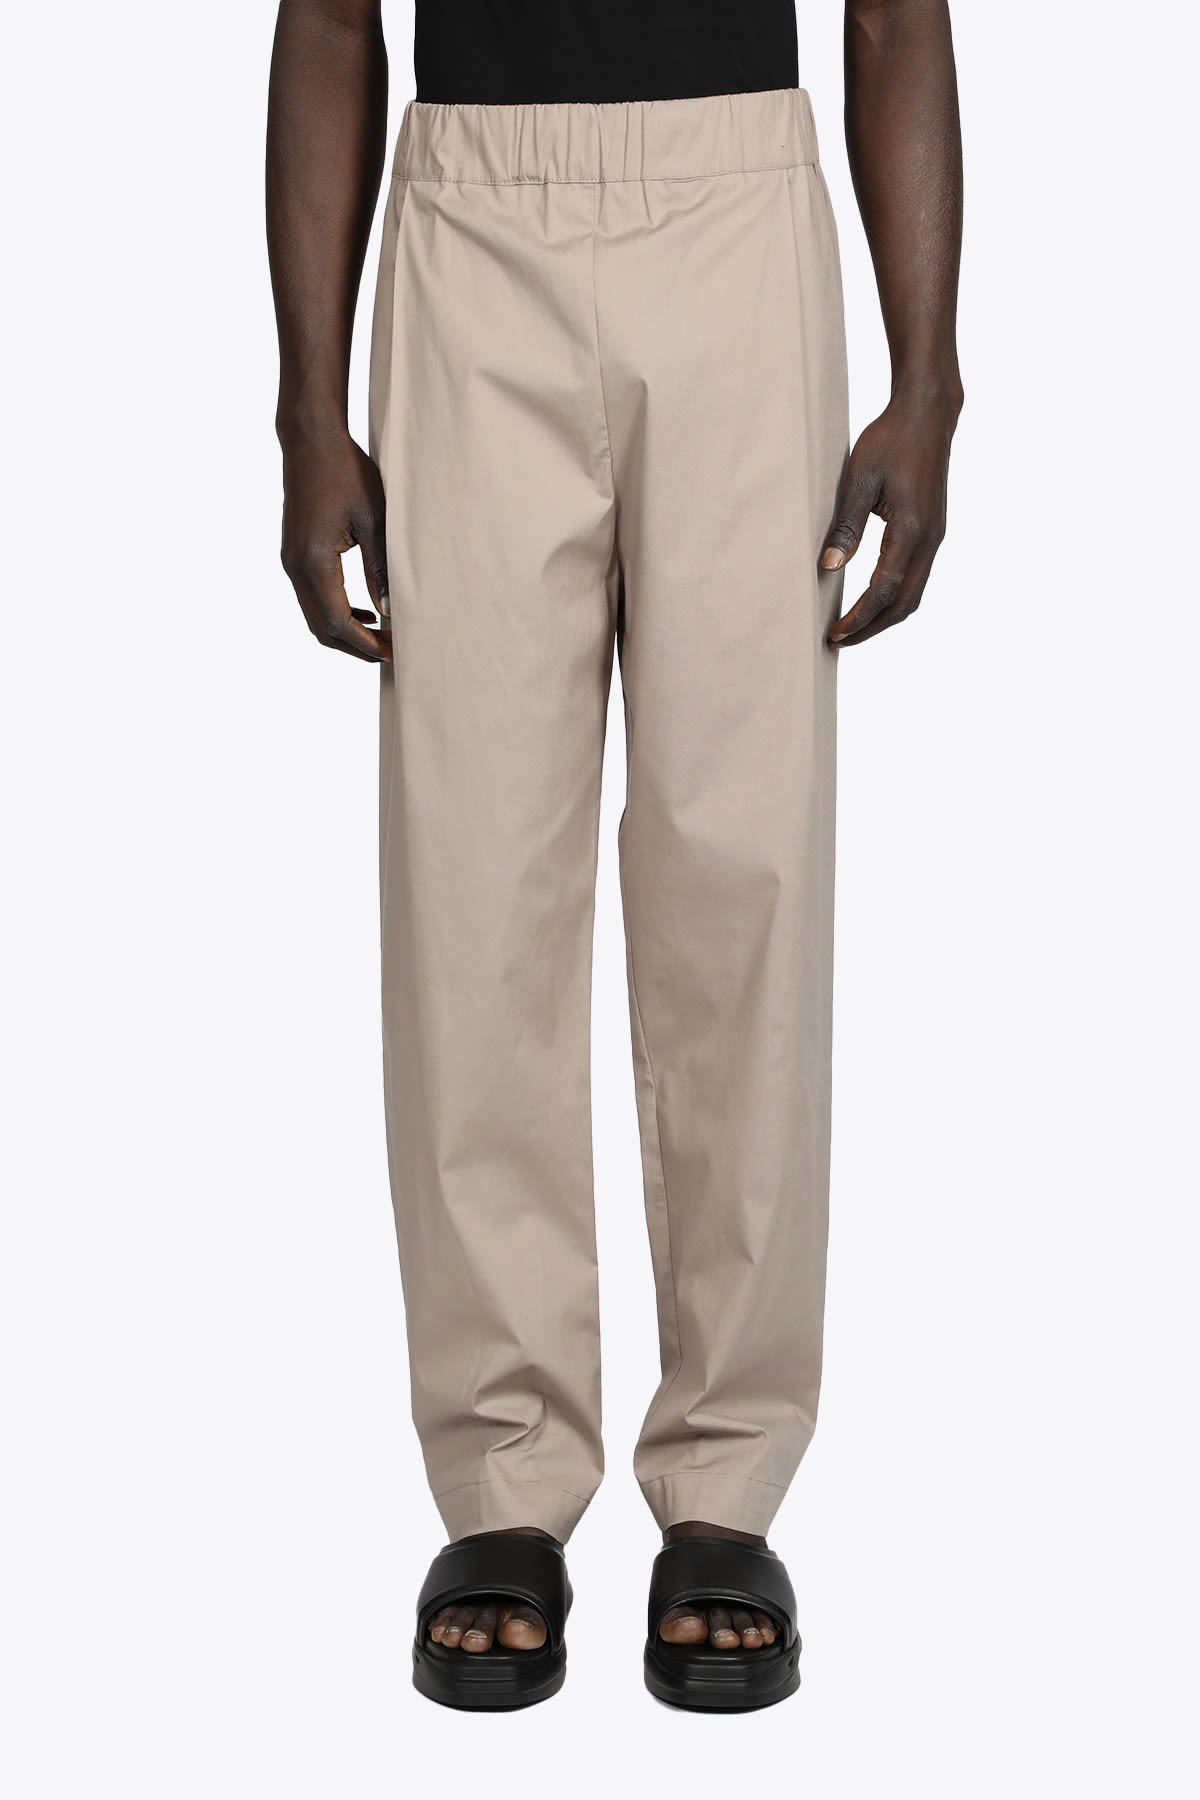 Laneus Baggy Unito Beige poplin cotton trousers with front pleat